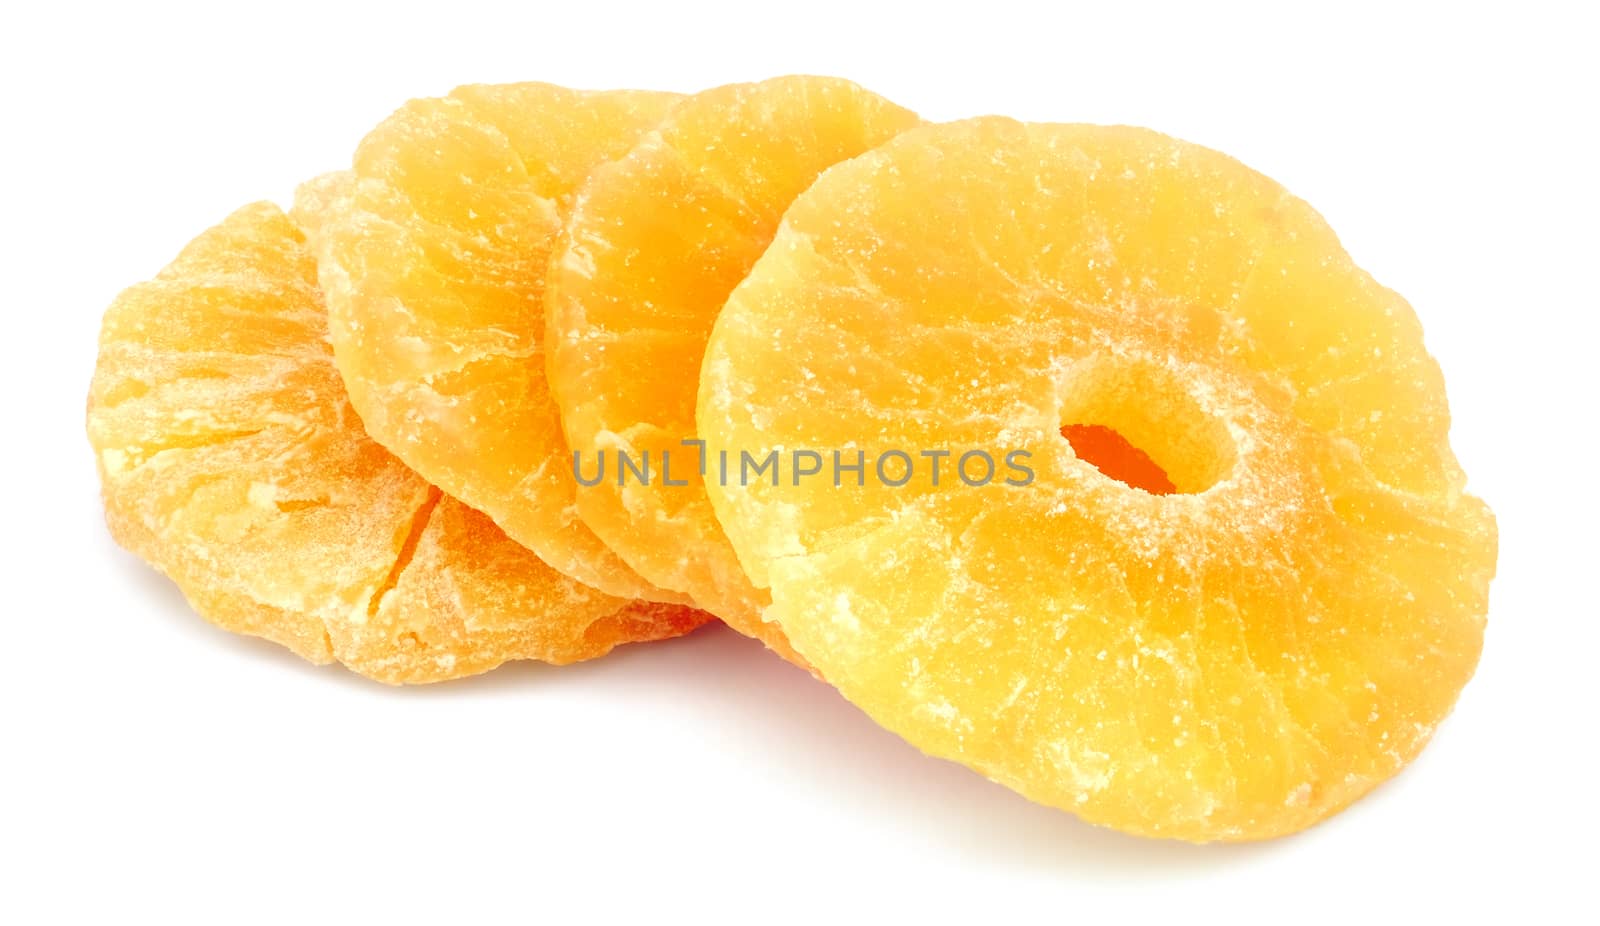 Dried ?andied pineapple rings isolated on white background.